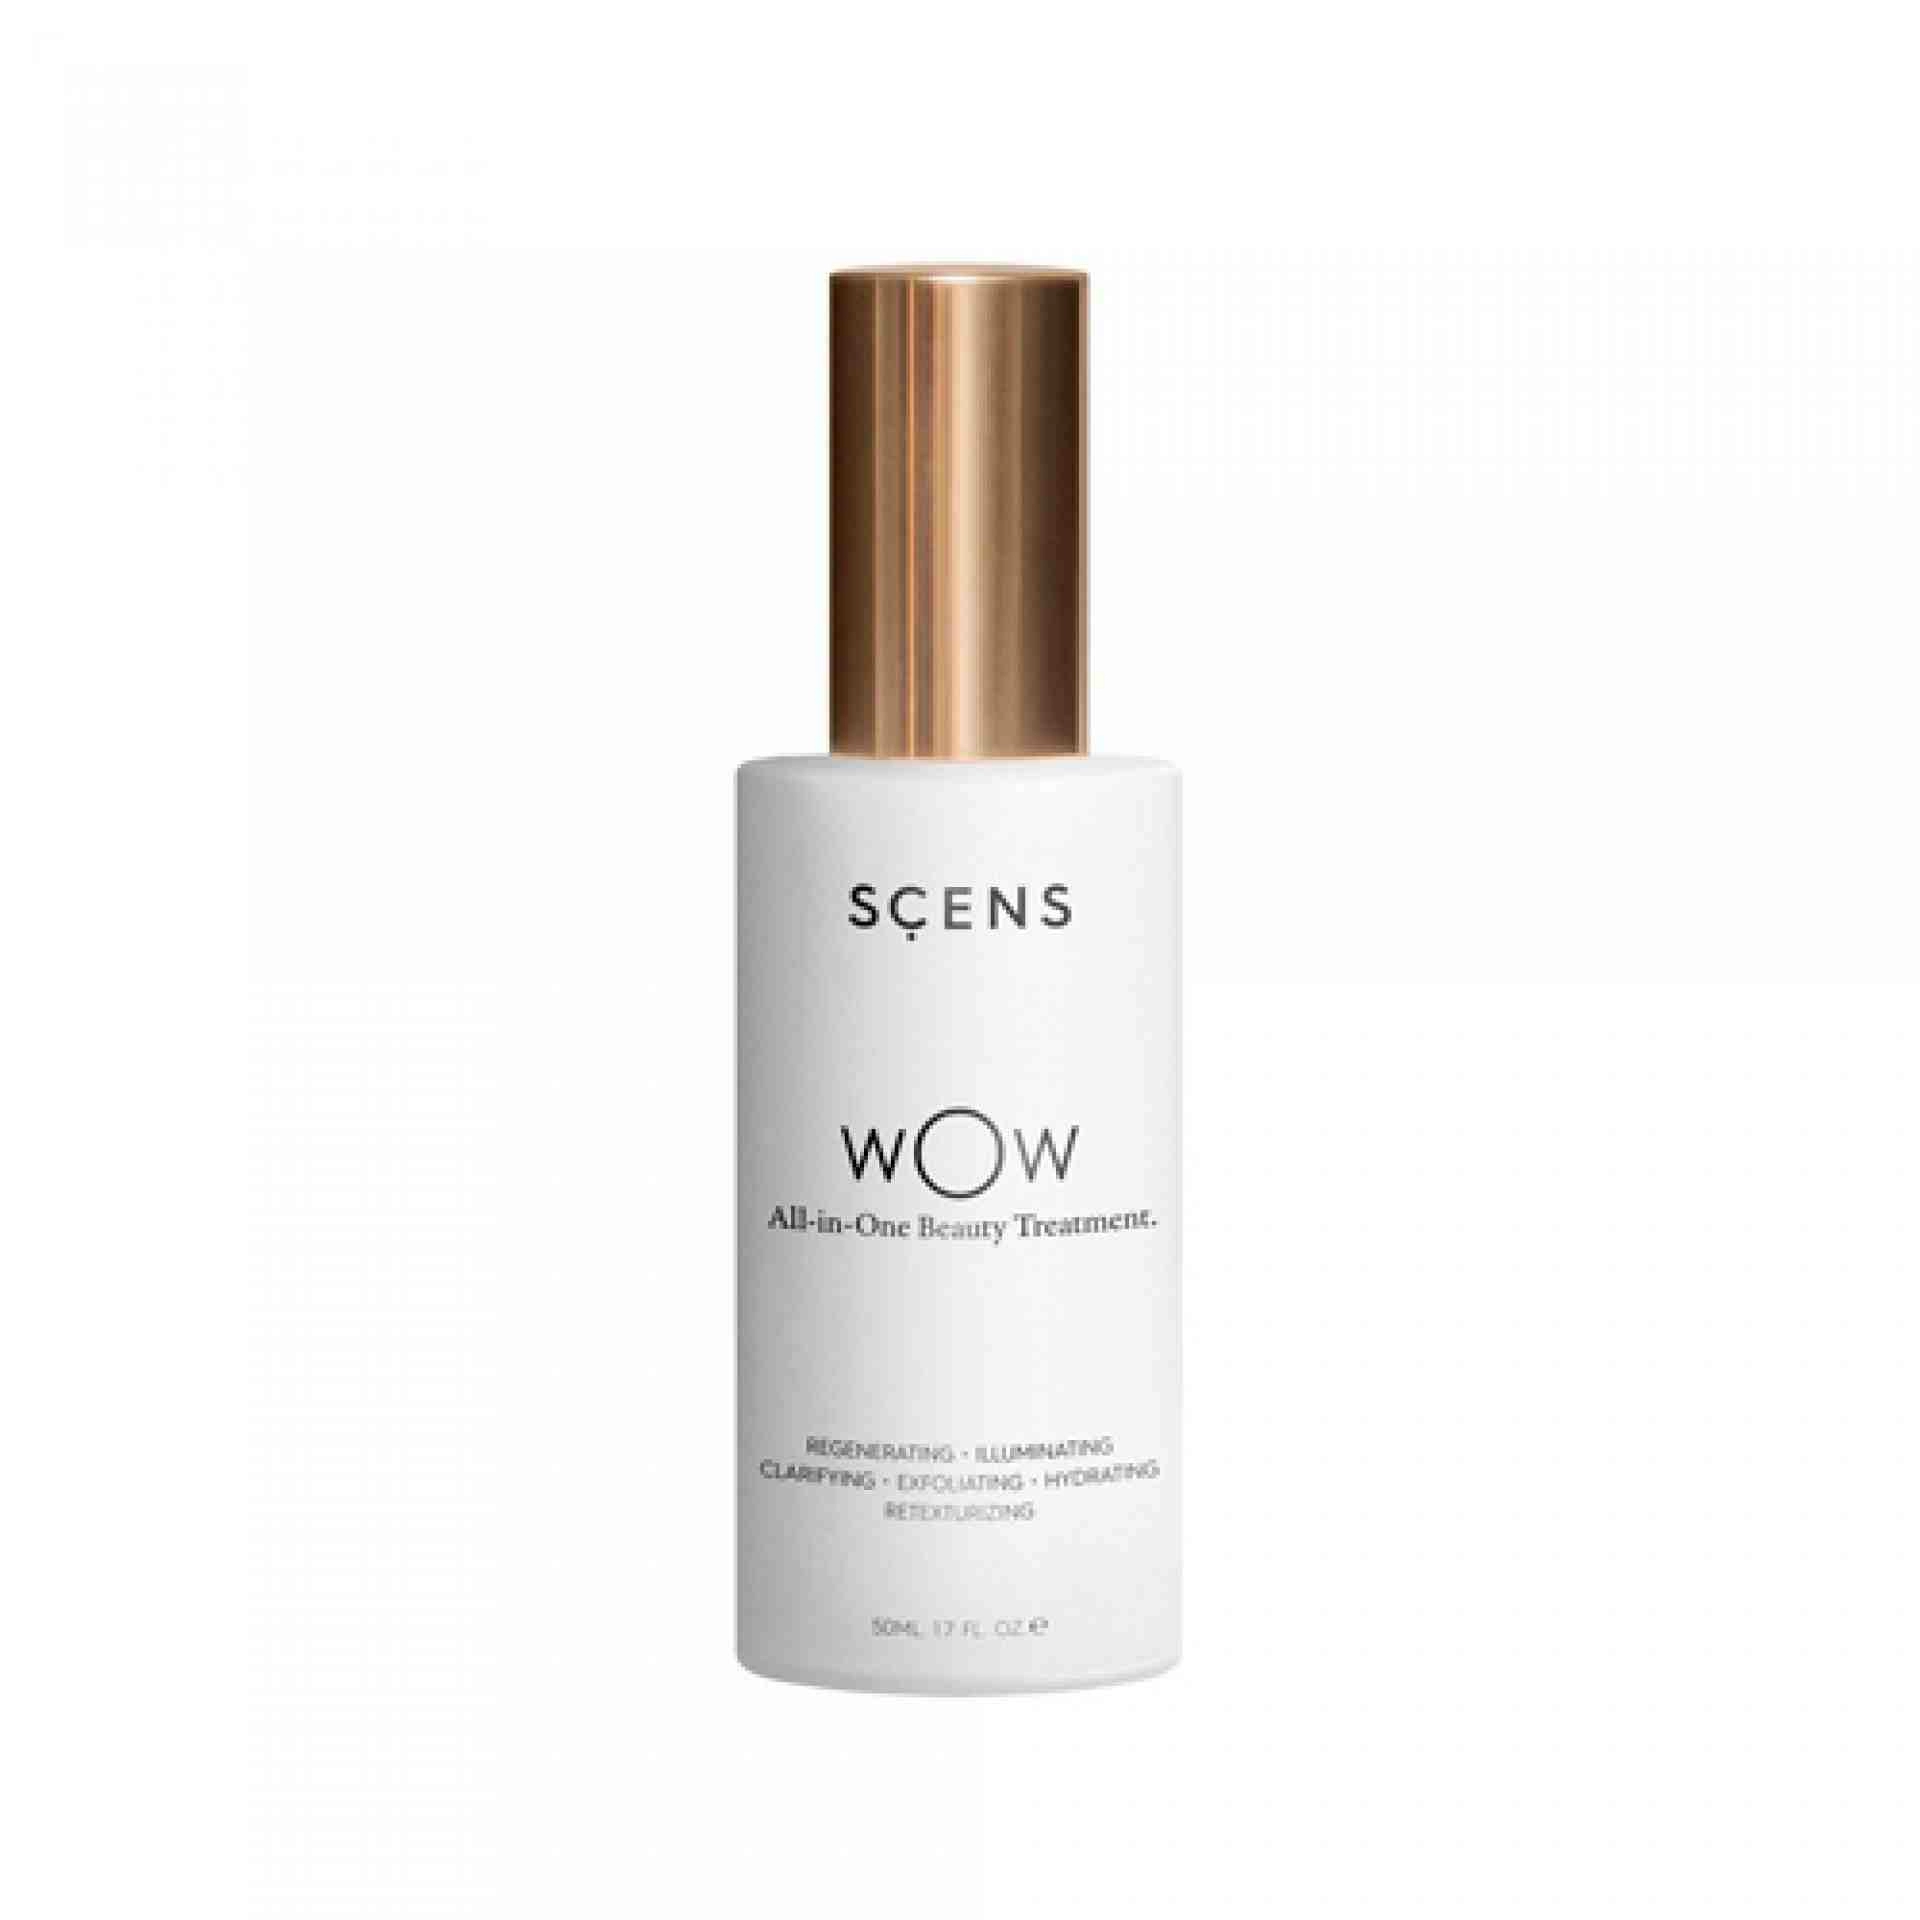 WOW All-in-One Beauty Treatment | Tratamiento Integral 50ml - Scens ®